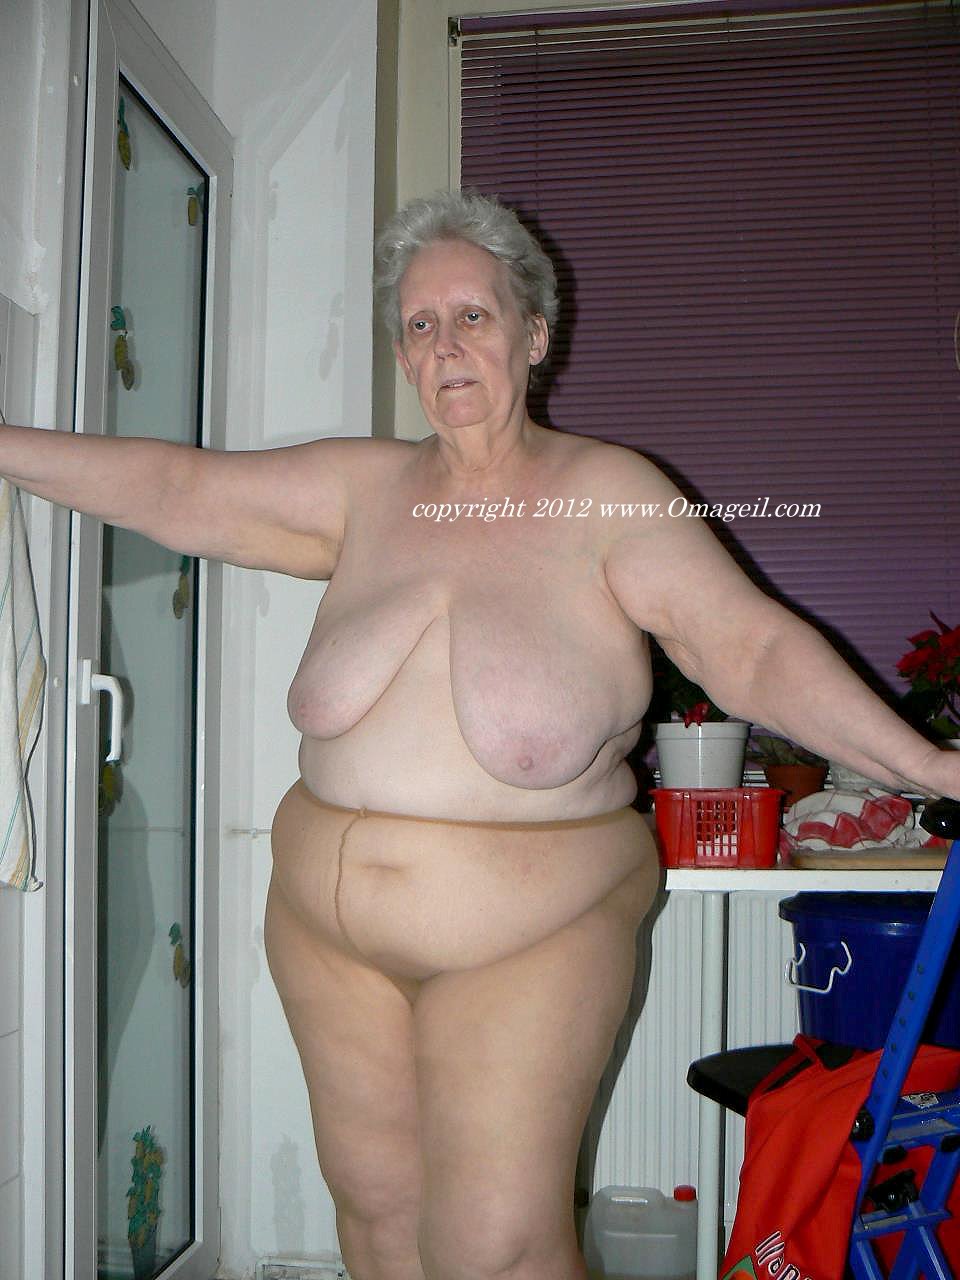 Big Busty Hot Granny - Hot Granny Porn Pictures and Vids - Free Granny and Mature ...